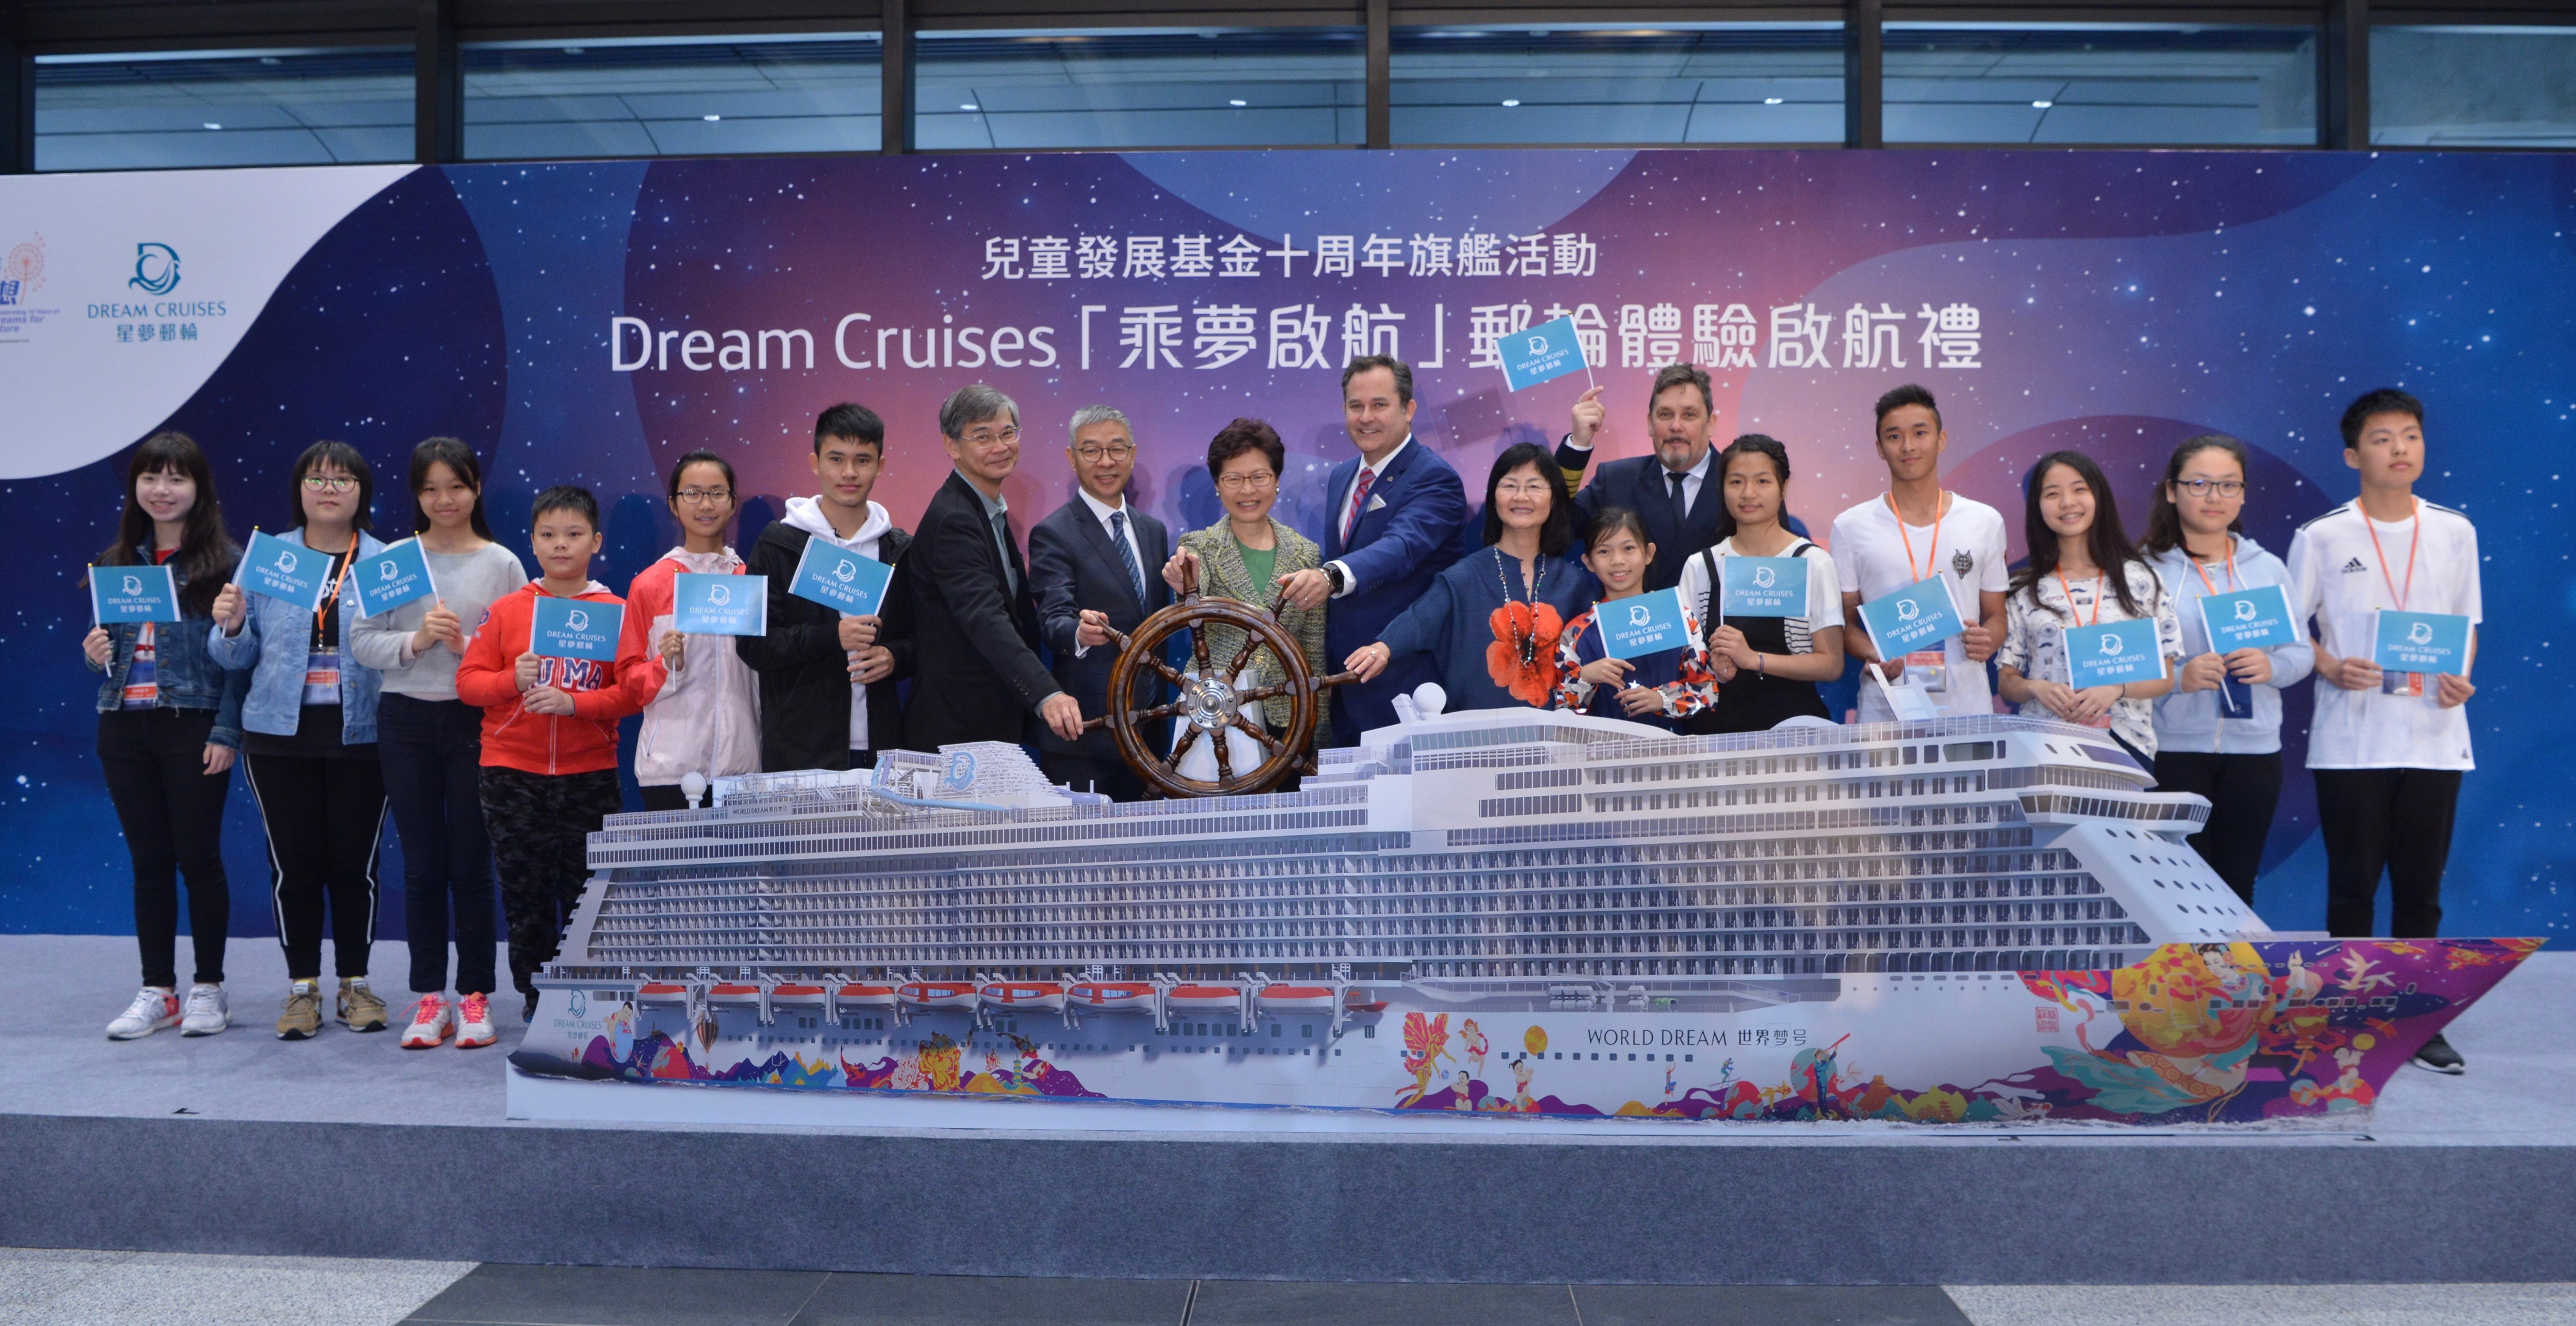 The Chief Executive, Mrs Carrie Lam (ninth left), the Secretary for Labour and Welfare, Dr Law Chi-kwong (seventh left), the Permanent Secretary for Labour and Welfare, Ms Chang King-yiu (eighth right), the President of Genting Cruise Lines, Mr Kent Zhu (eighth left), the President of Dream Cruises, Mr Thatcher Brown (ninth right) and the Captain of Dream Cruises, Captain Jan Blomqvist (sixth right), officiated at the Set Sail Ceremony for the CDF 10th Anniversary Signature Programme “Dream Cruises”.